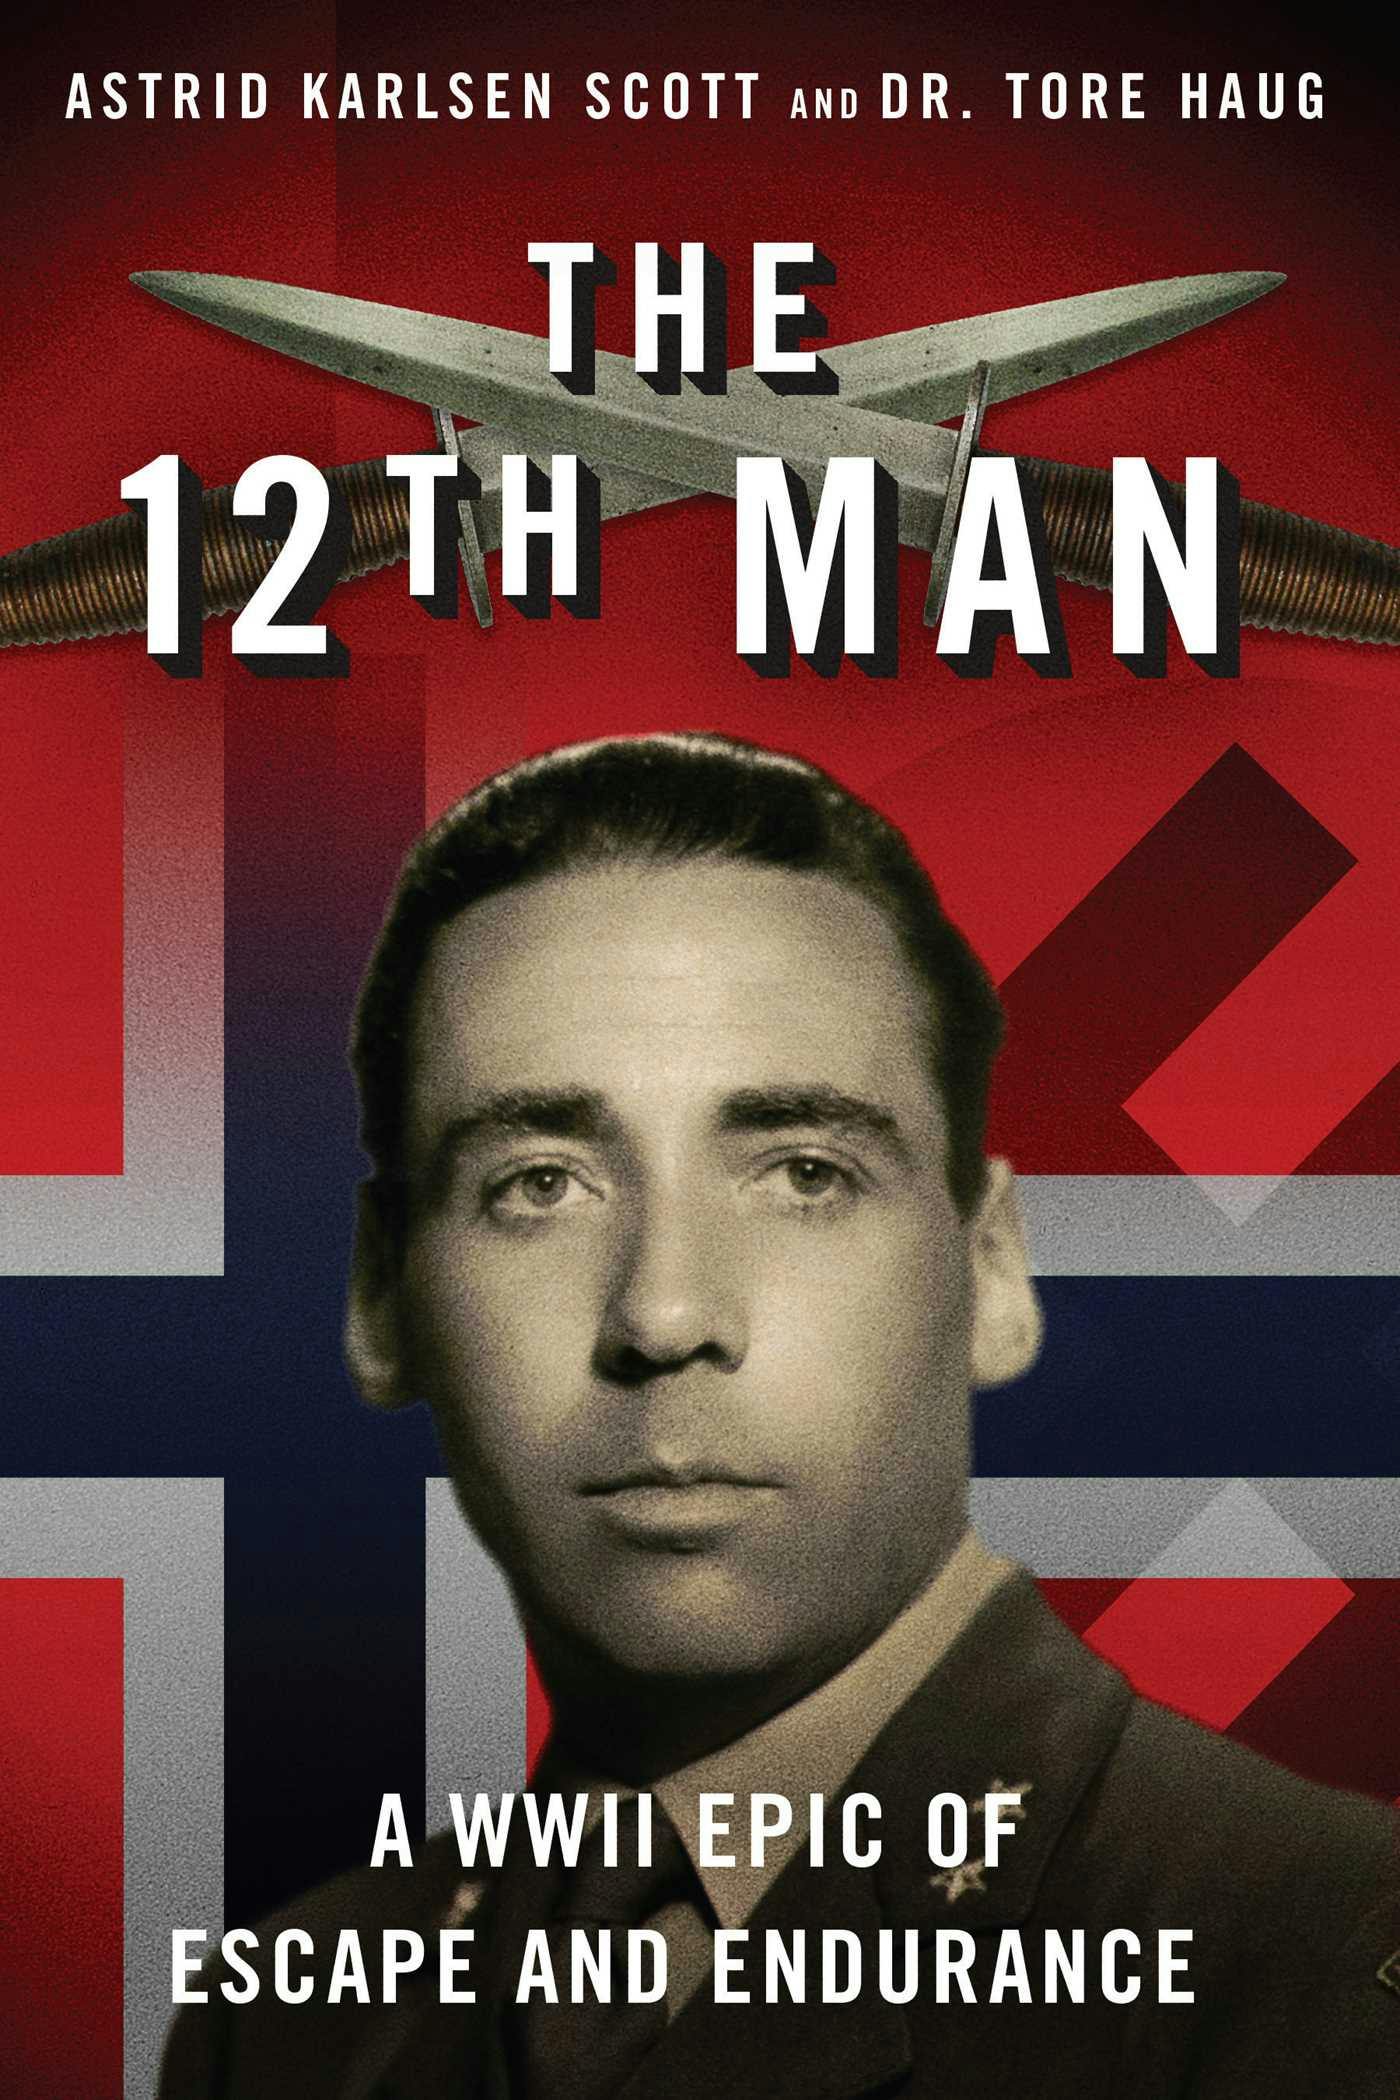 The 12th Man: A WWII Epic of Escape and Endurance - Astrid Karlsen Scott, Tore Haug